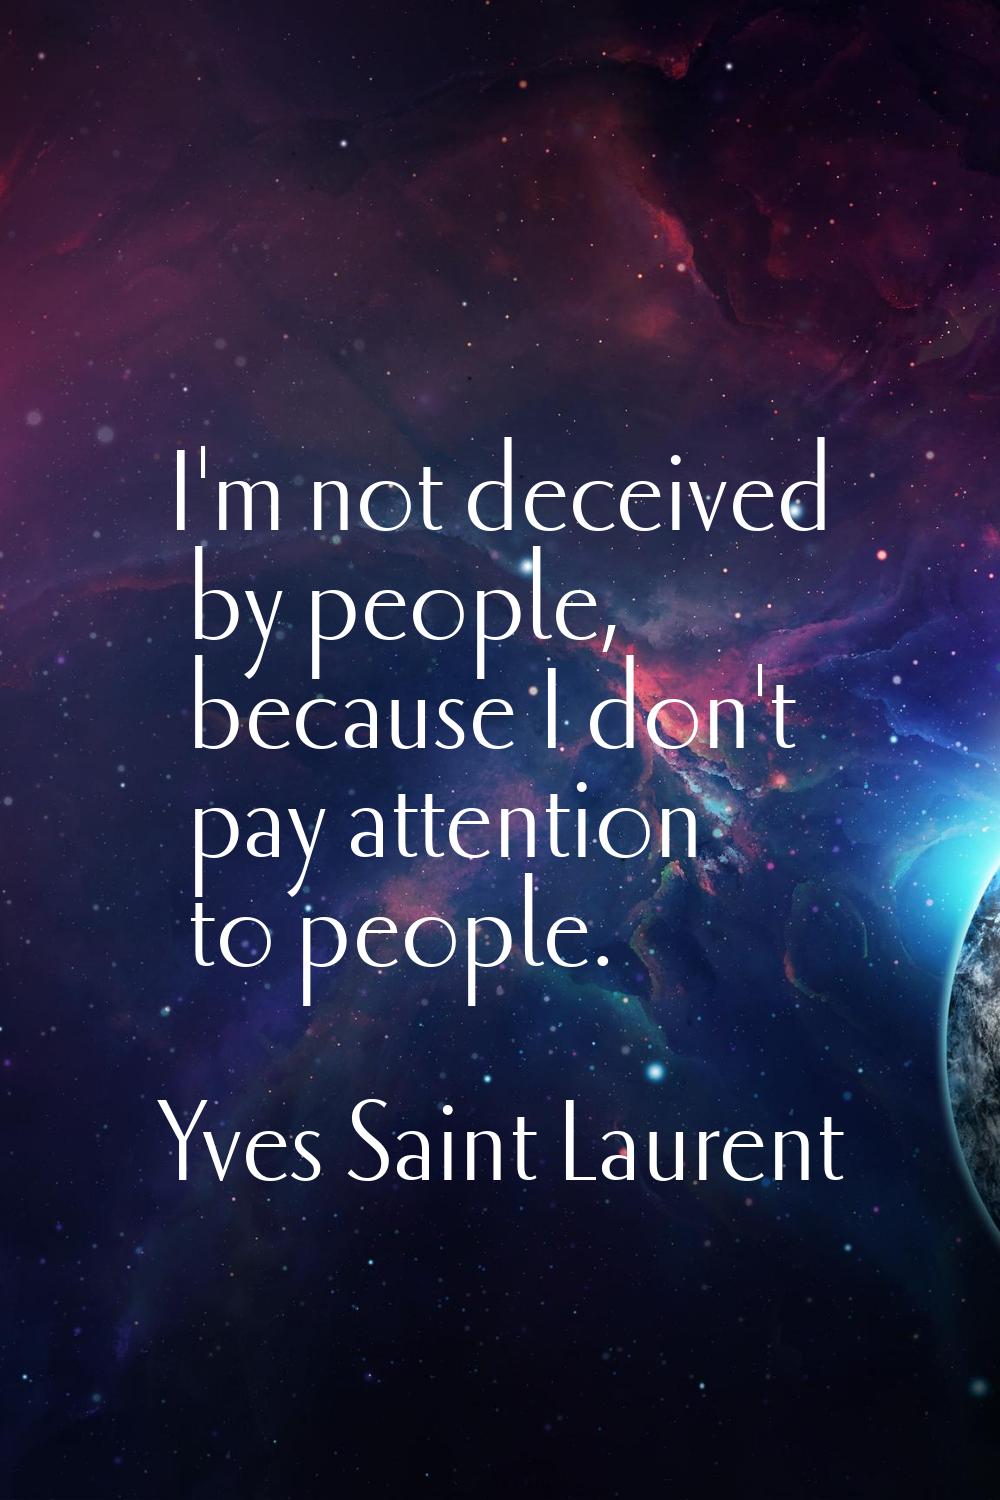 I'm not deceived by people, because I don't pay attention to people.